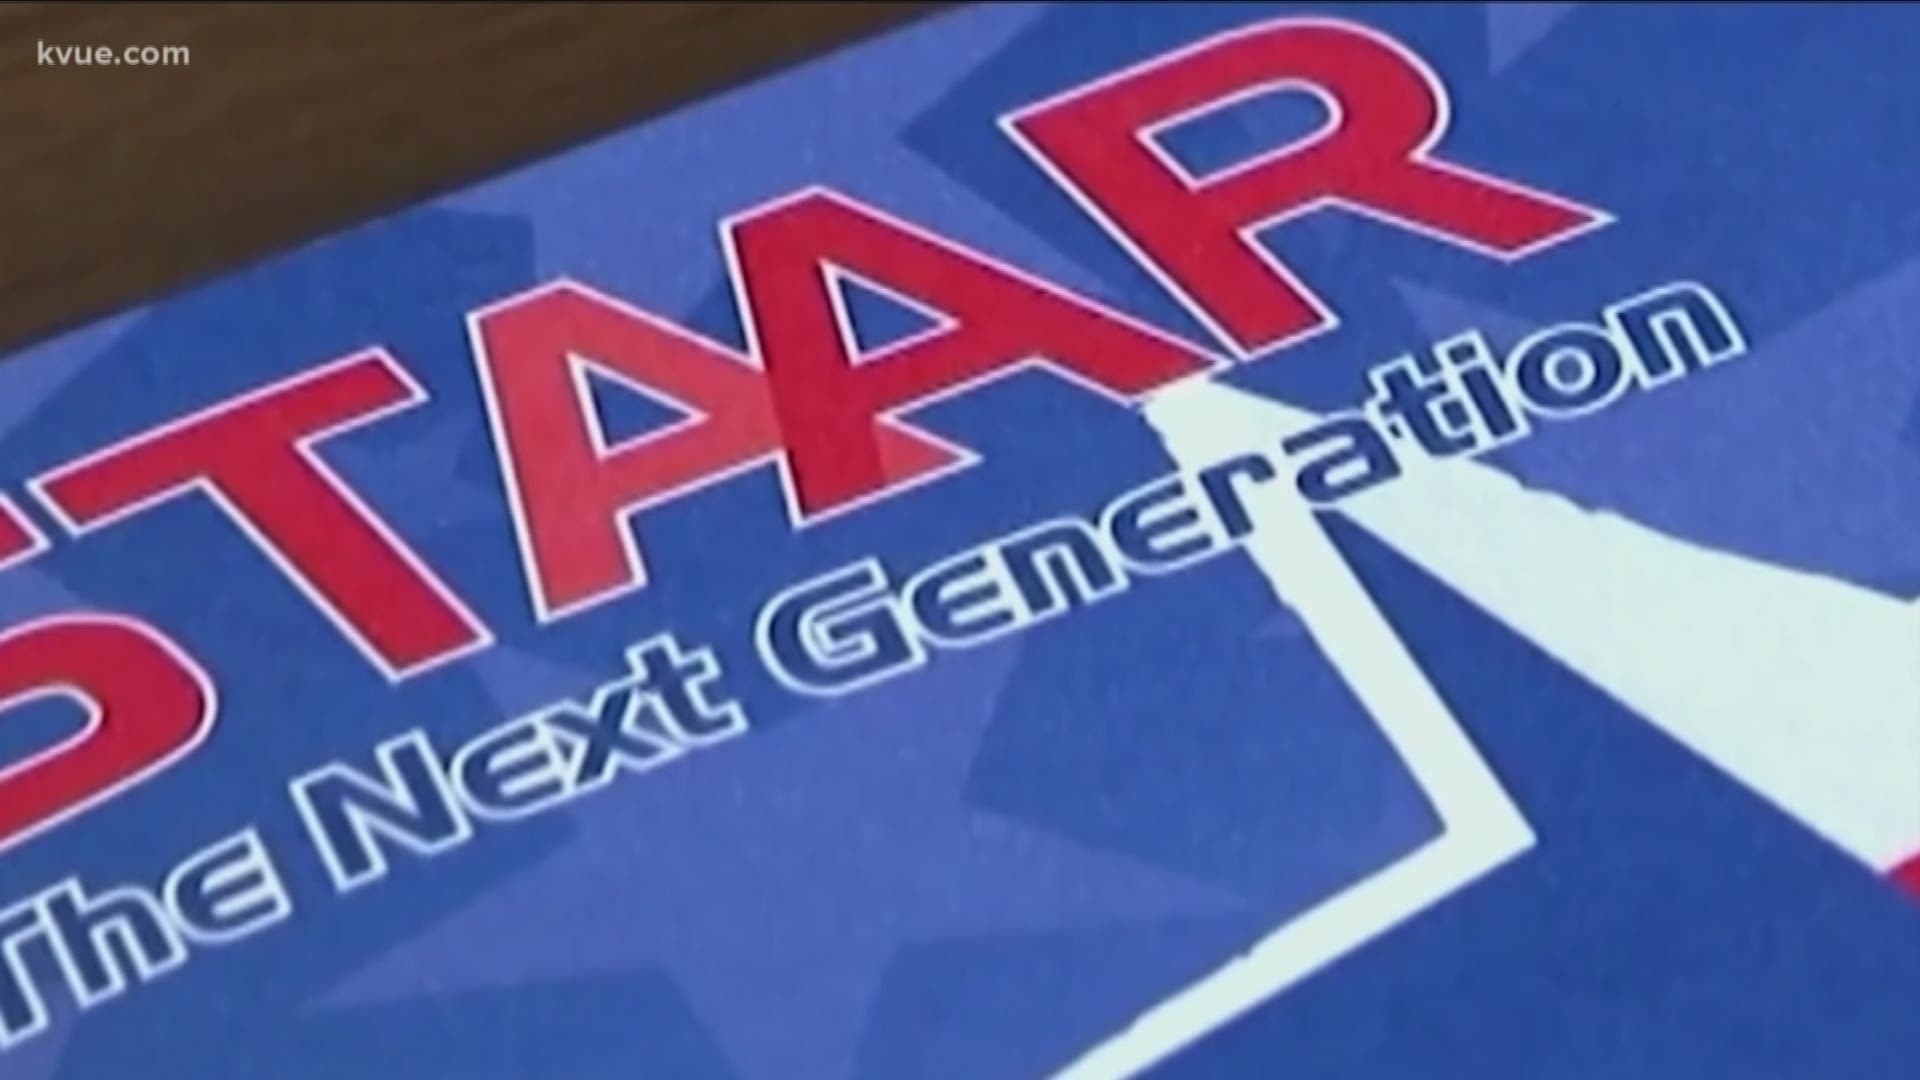 A new study shows the required standardized tests Texas students take aren't too hard after all.